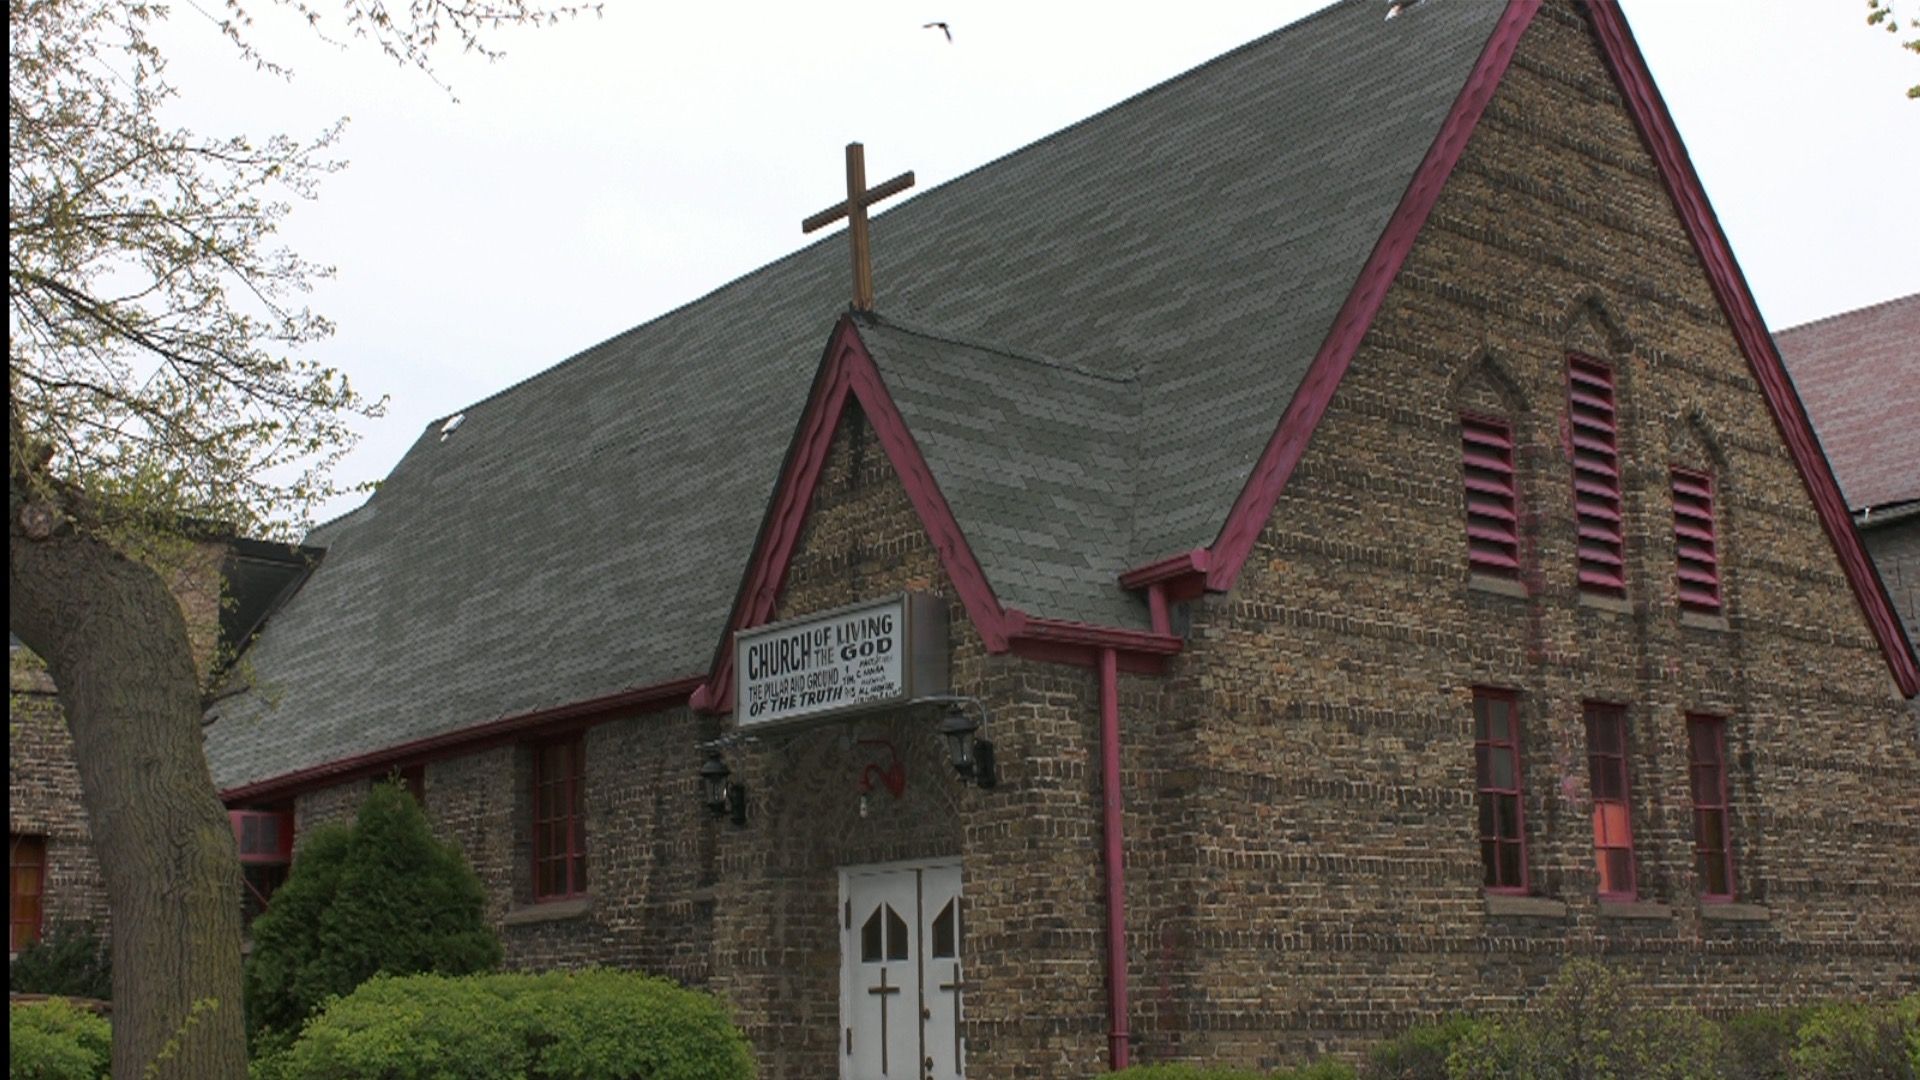 Church of the Living God Day Care